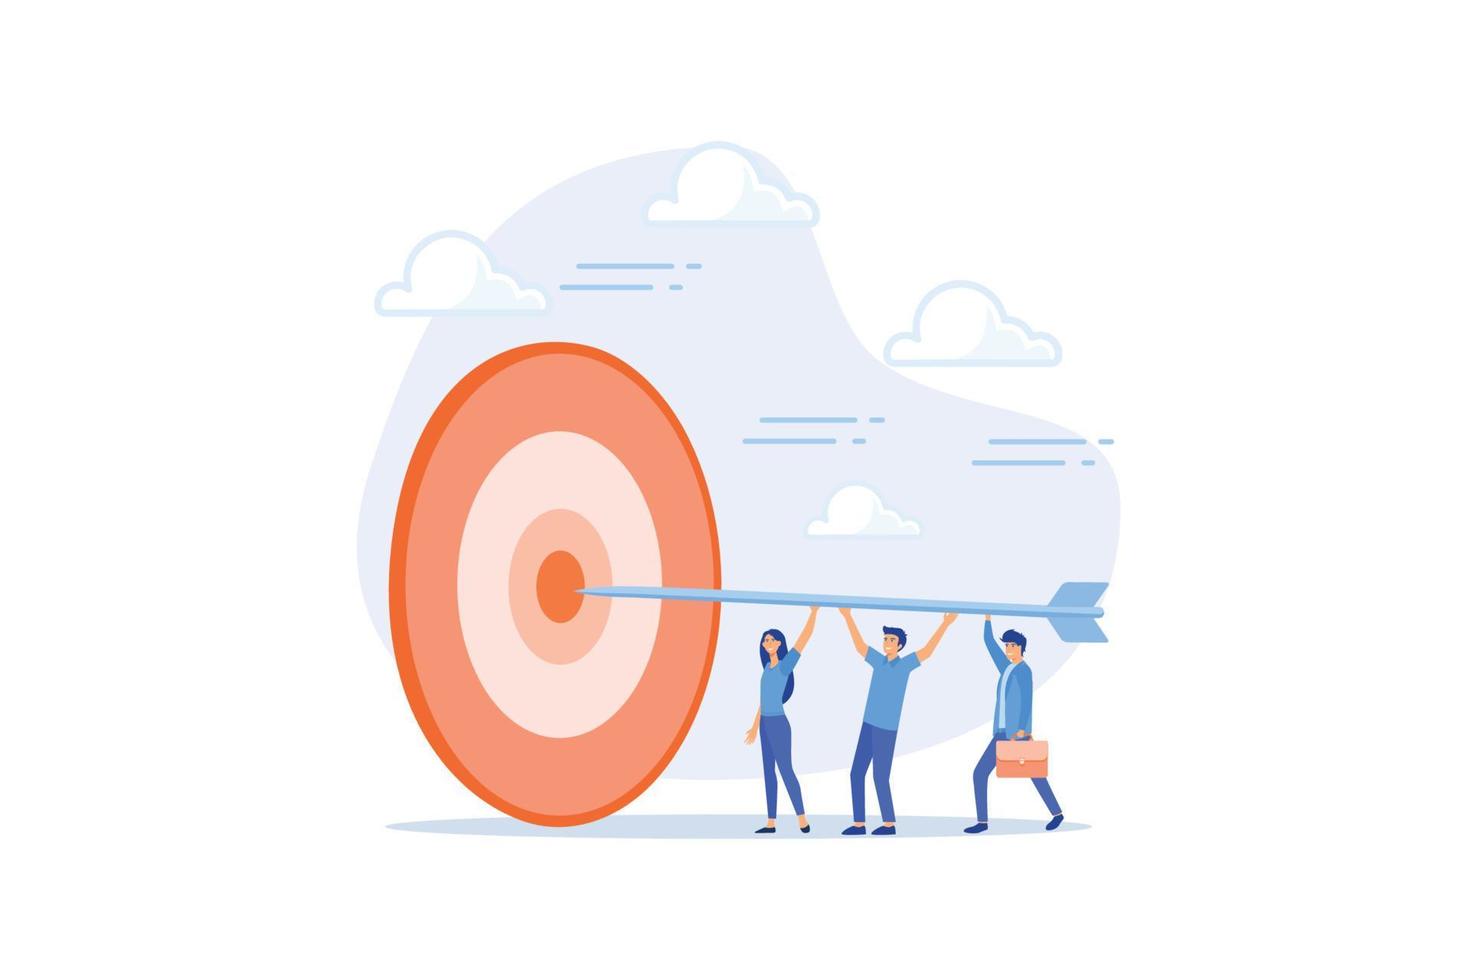 Aiming at target, reaching goal or achievement, team collaboration or partnership, teamwork or corporate mission concept, business man and woman, flat vector modern illustration